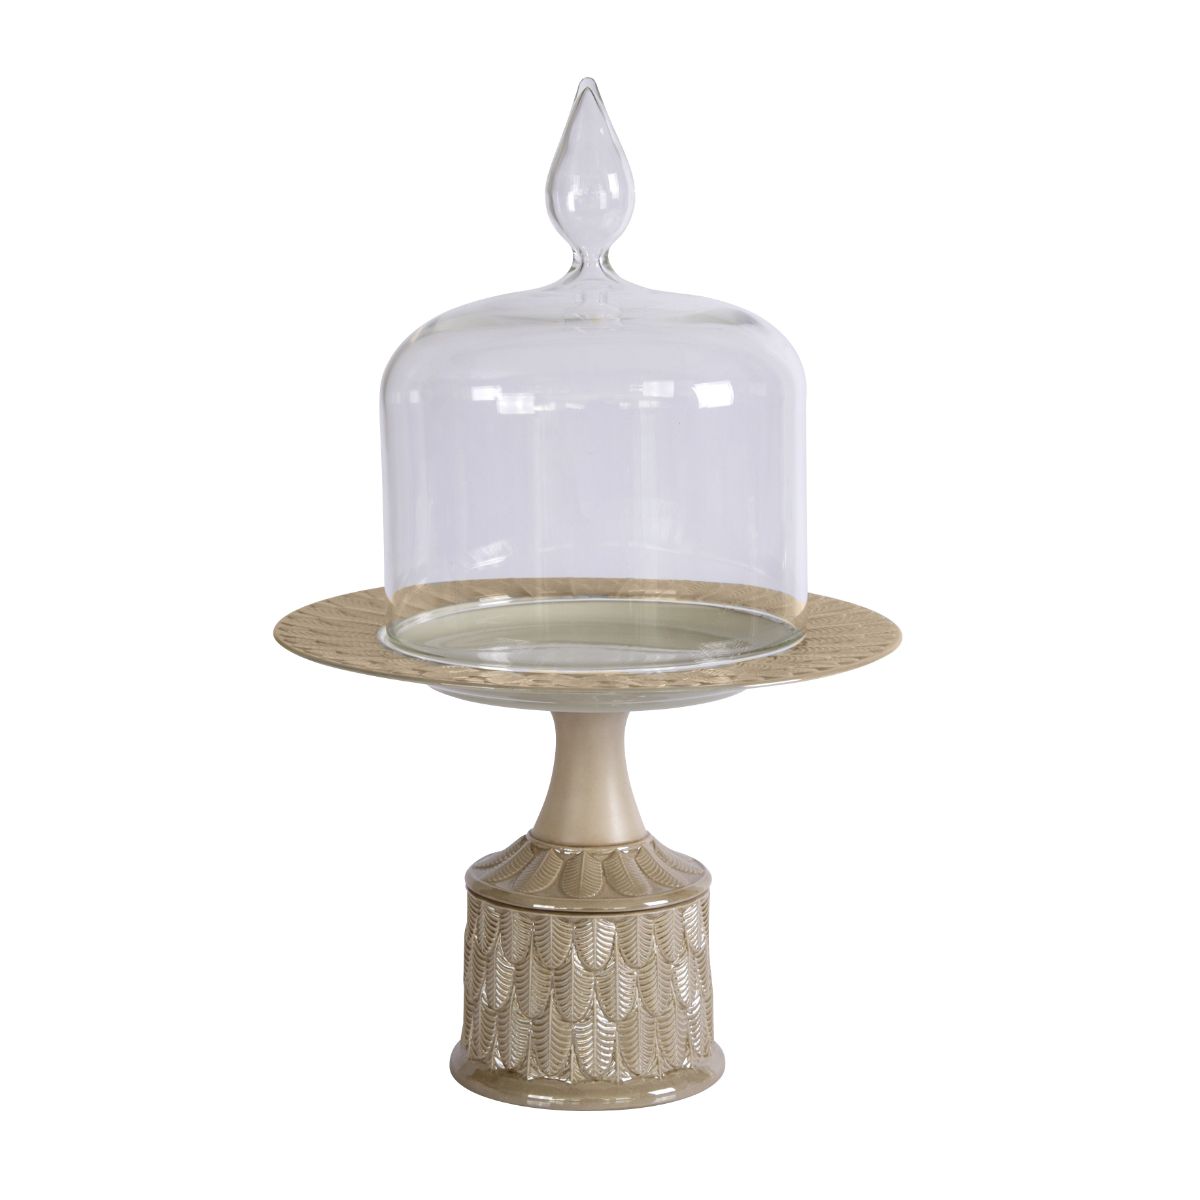 Peacock Caramel Medium Cake Stand With Cloche 